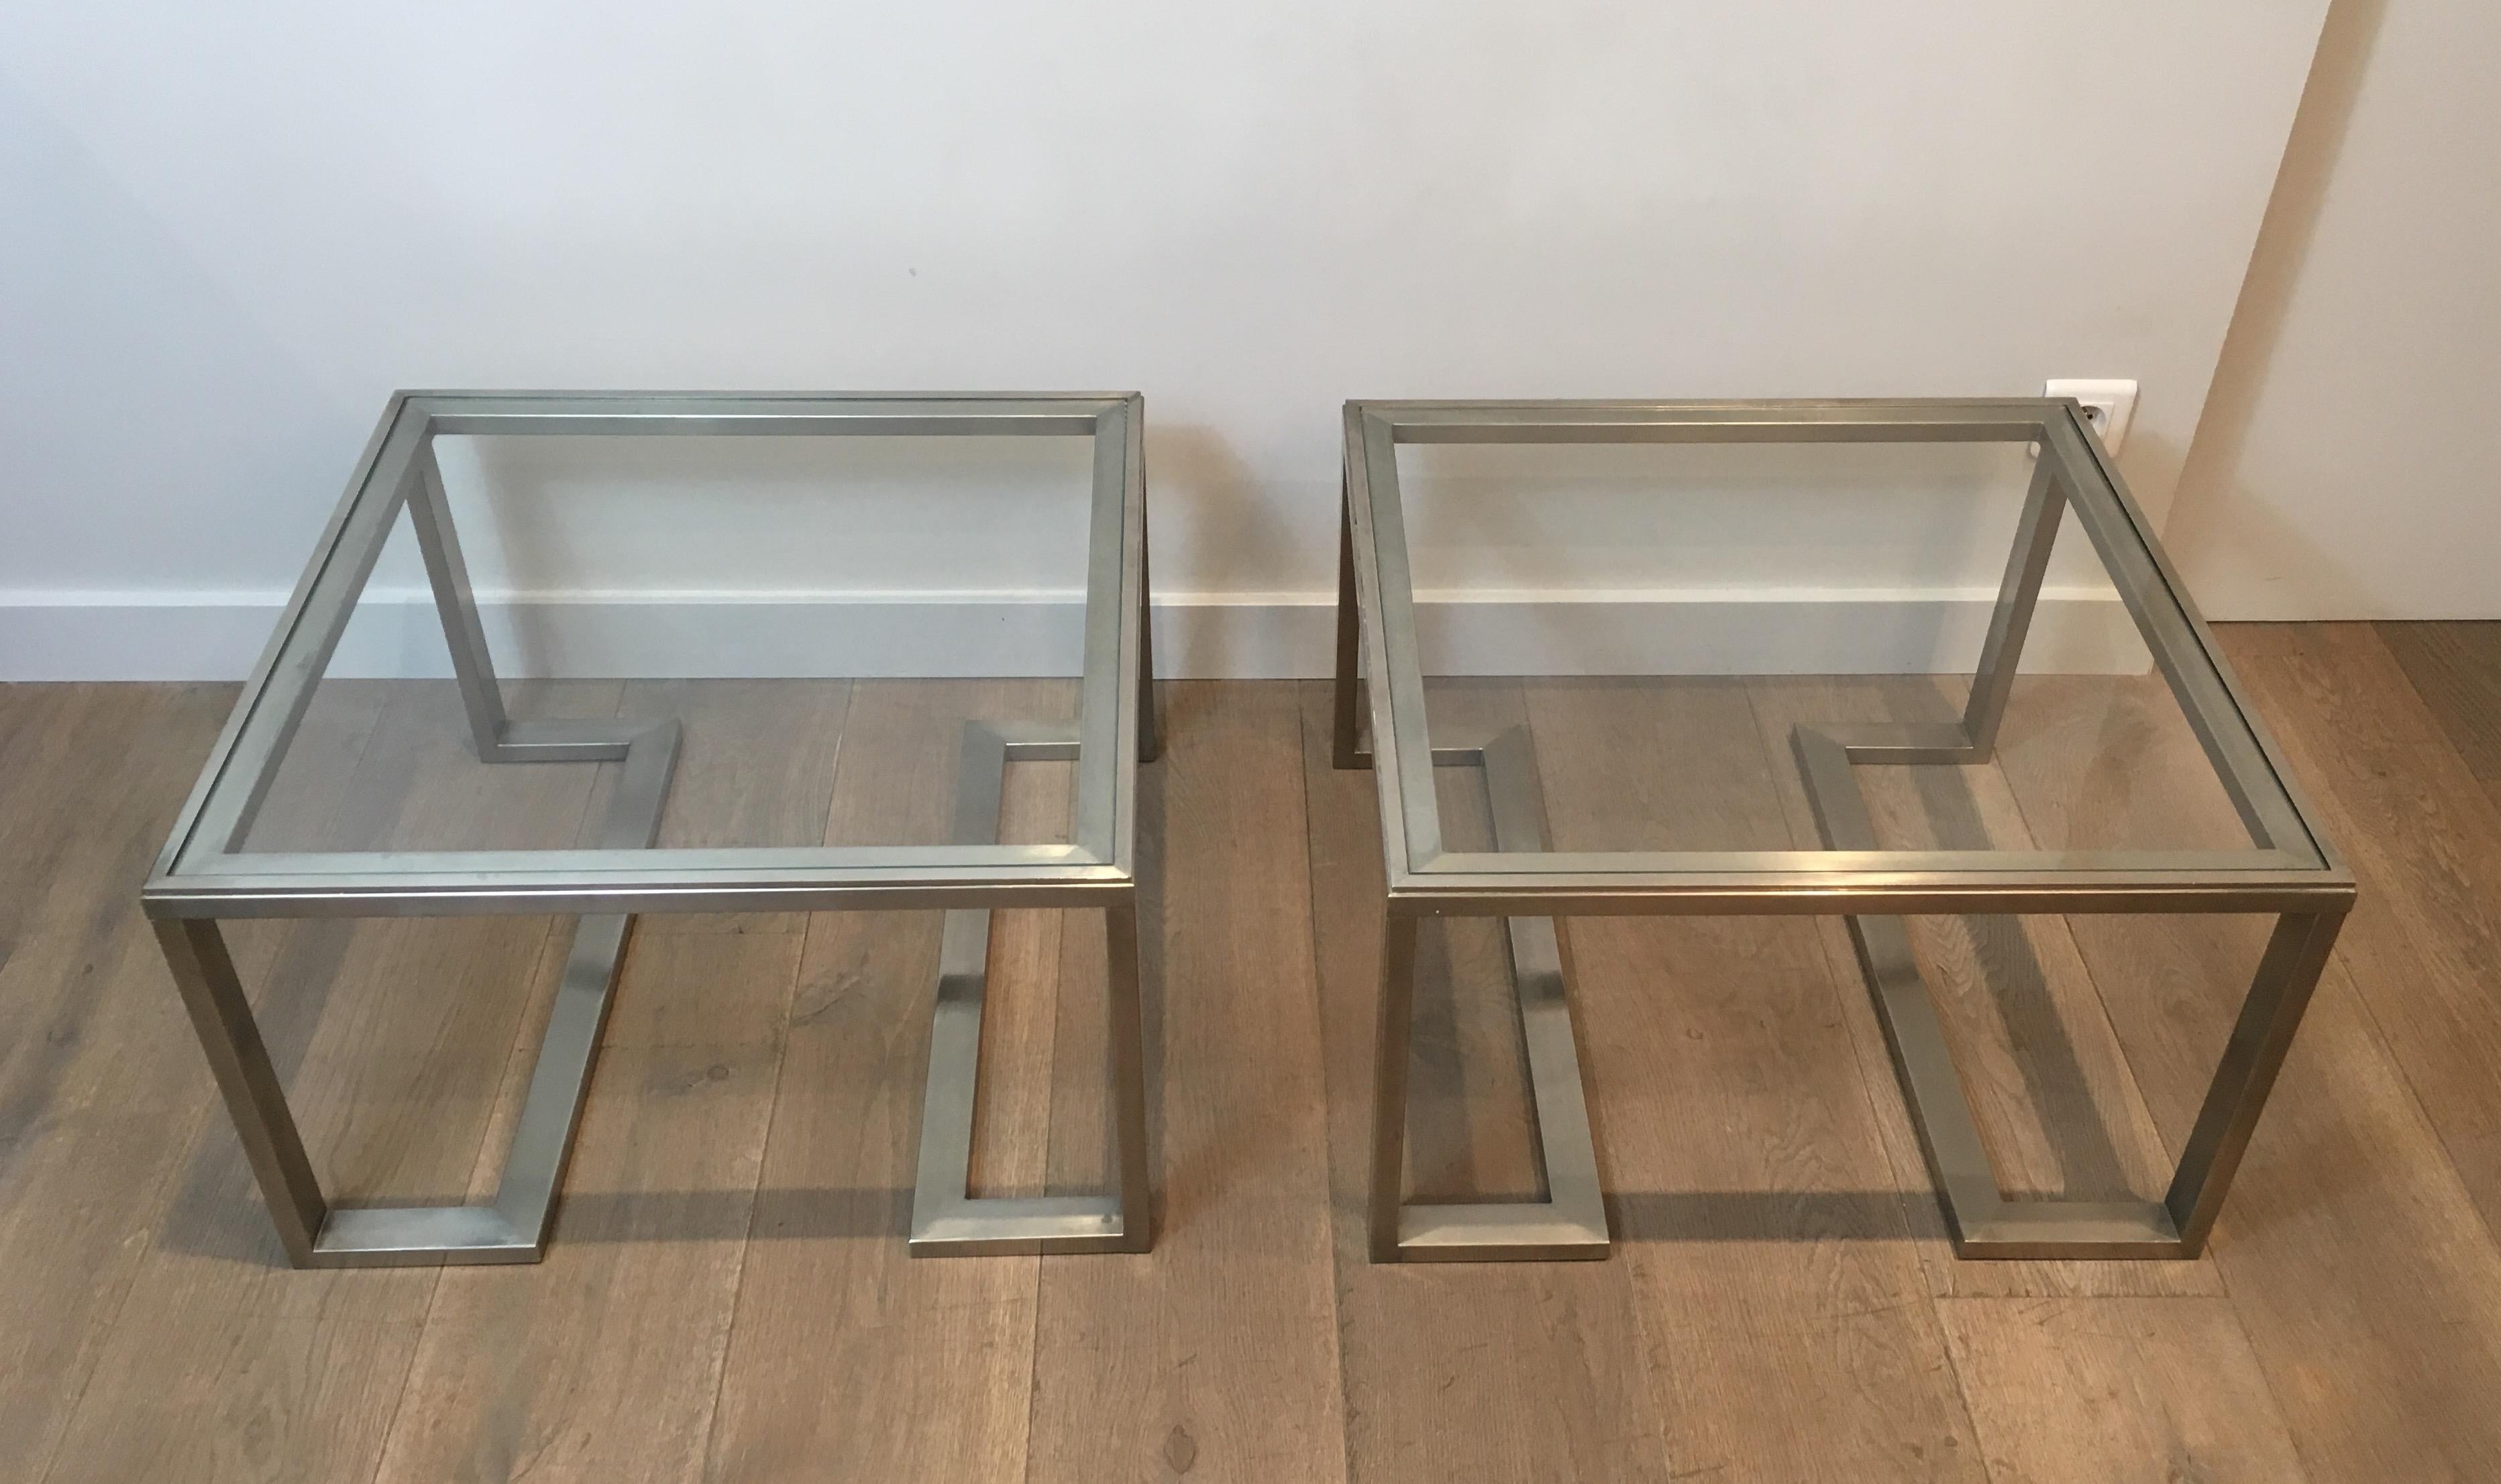 This pair of side tables is made of brushed steel with glass shelves. The quality is very good and the design very nice, in the style of famous French designer Guy Lefèvre, circa 1970.